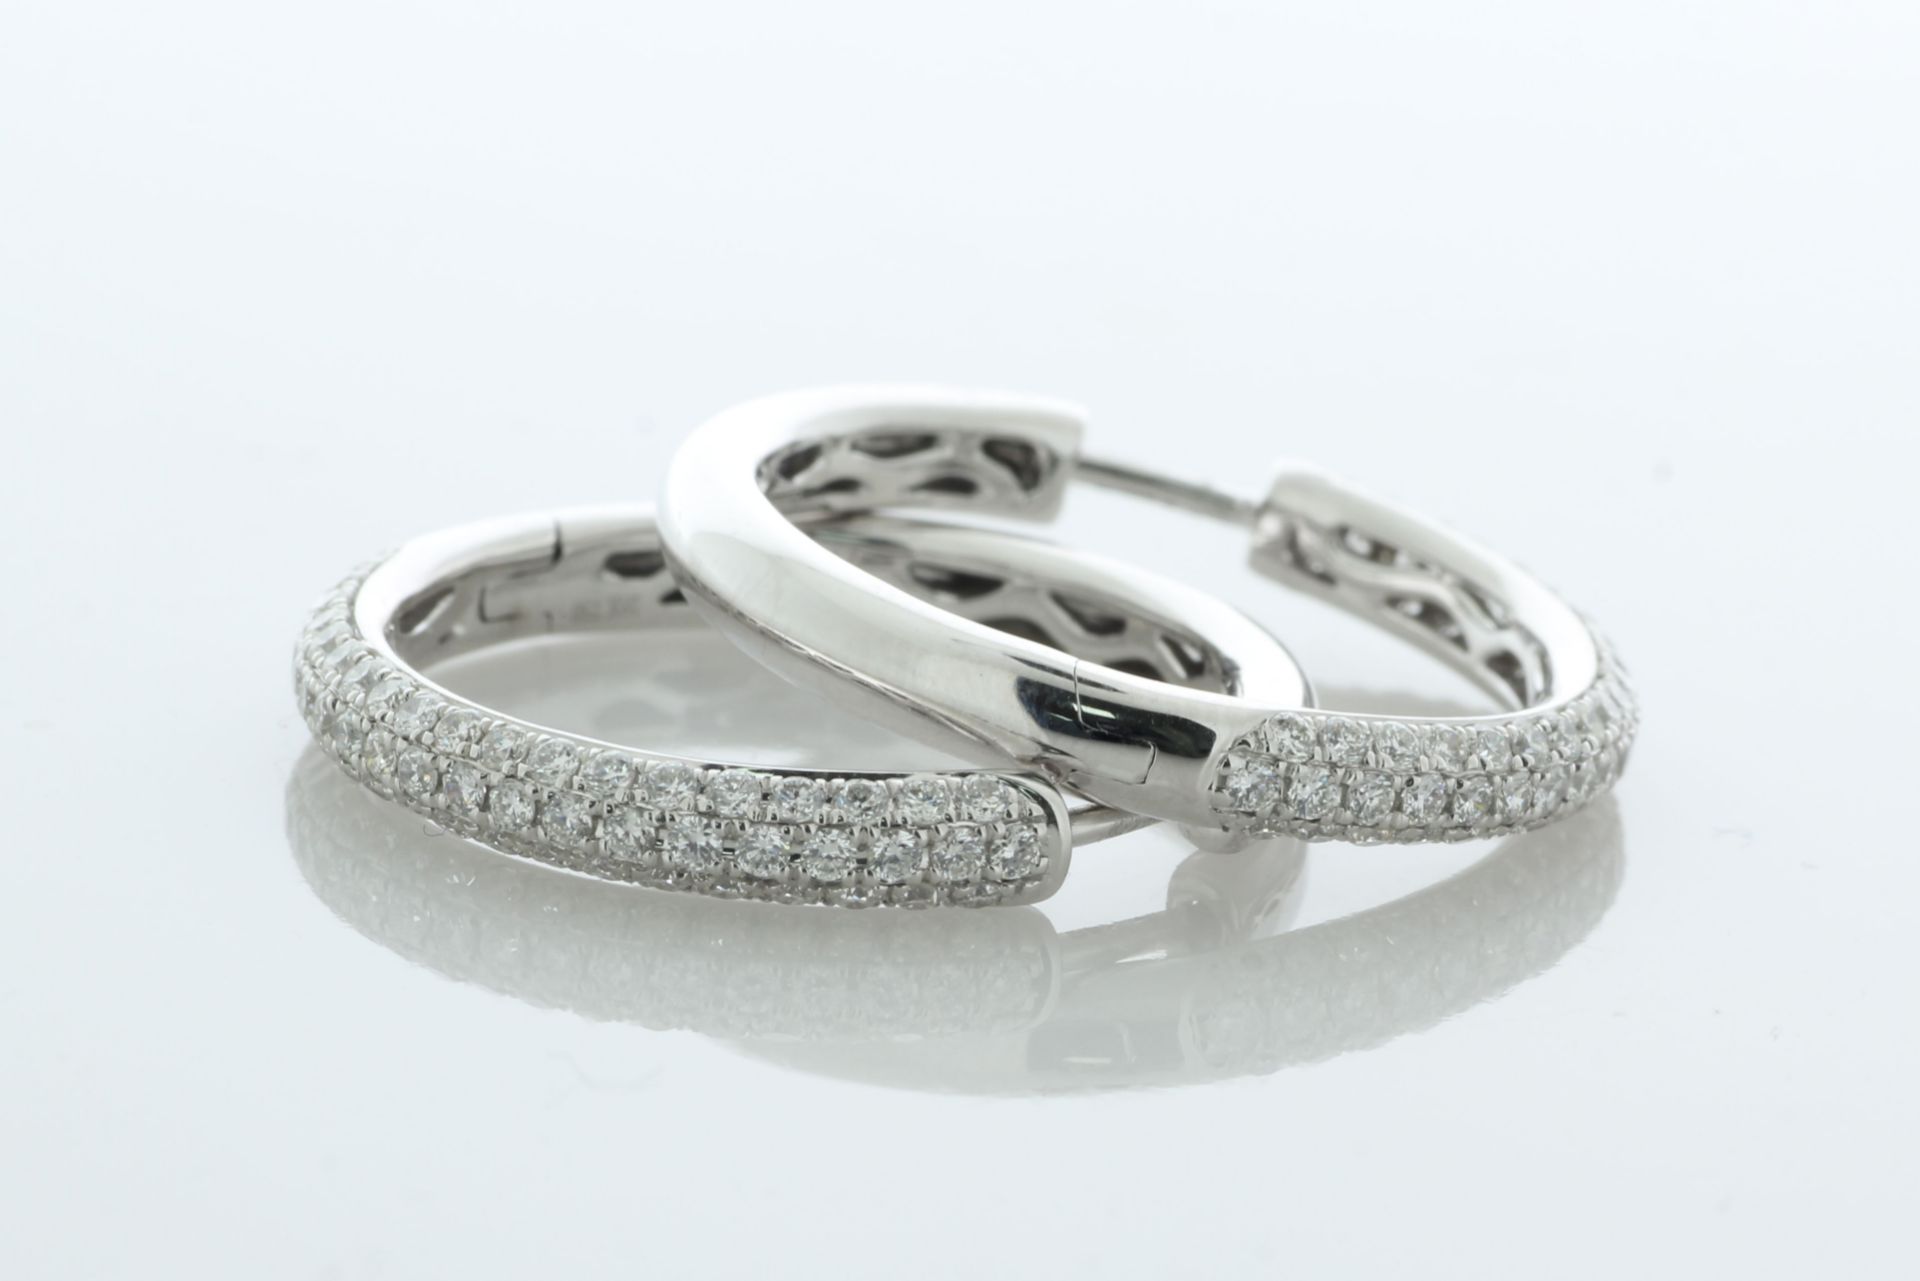 18ct White Gold Claw Set Hoop Diamond Earring 0.97 Carats - Valued By IDI £9,200.00 - One hundred